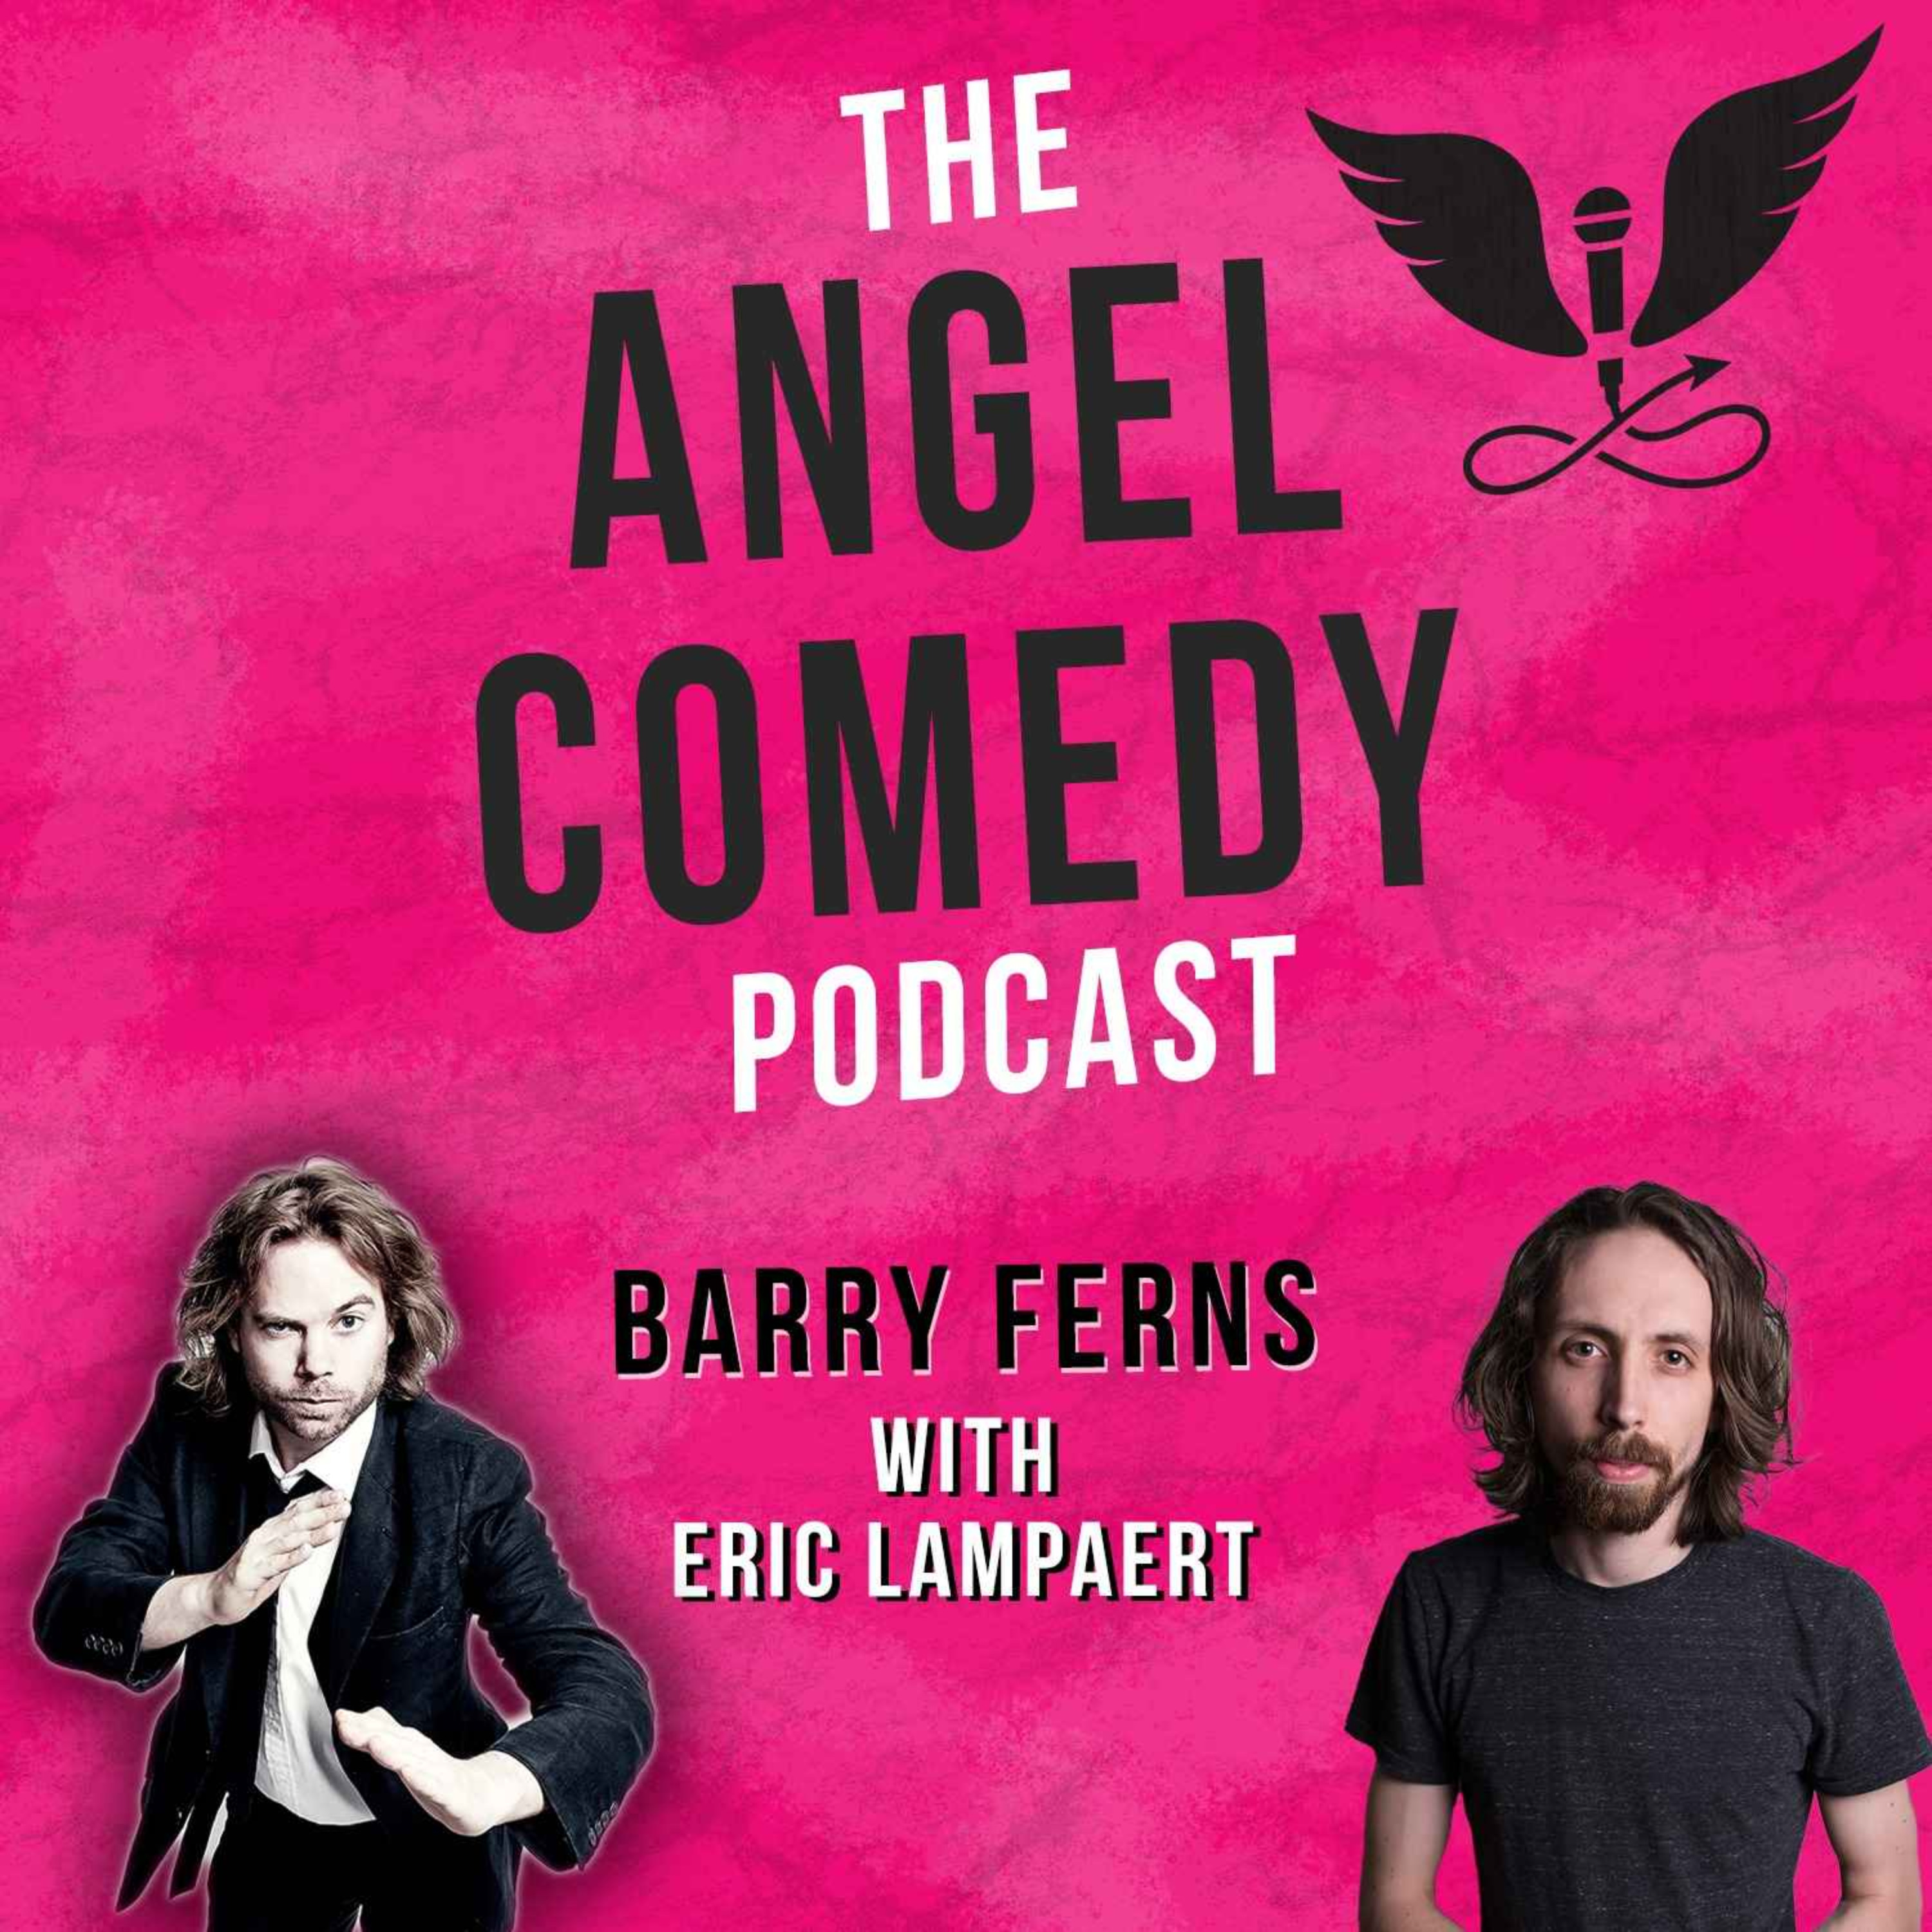 The Angel Comedy Podcast with Eric Lampaert